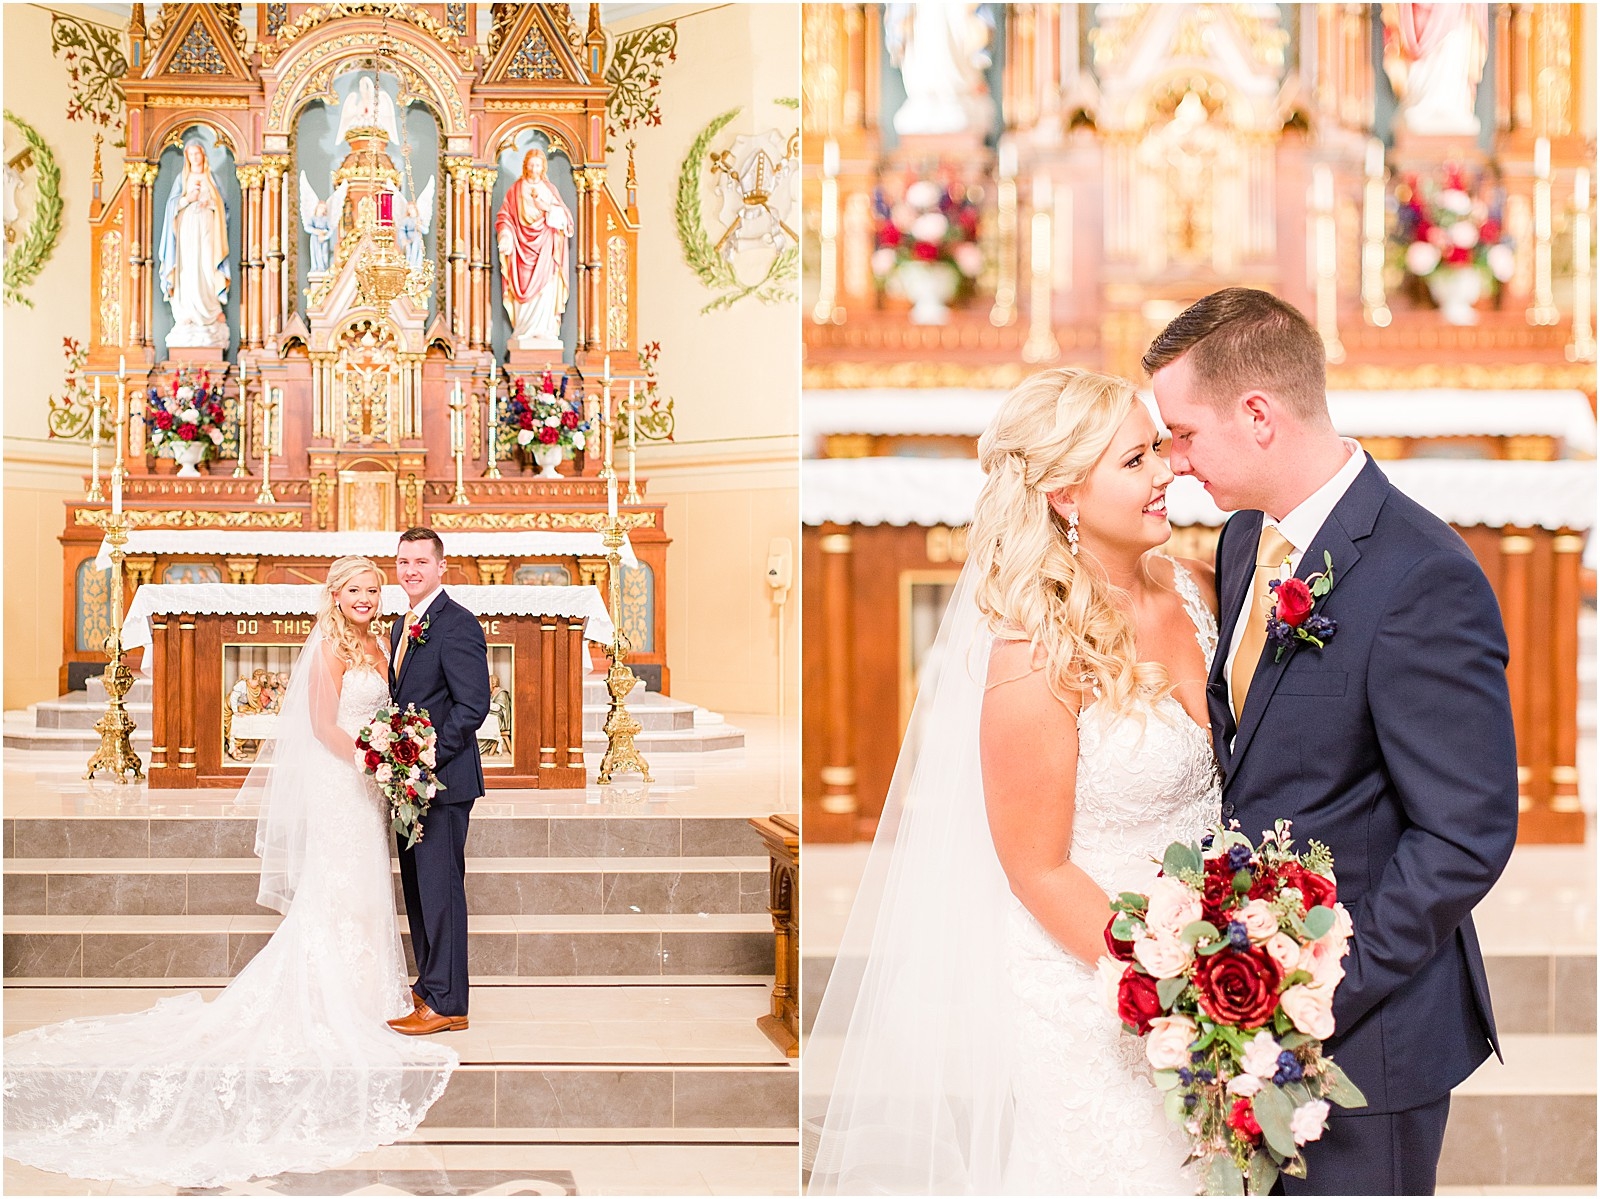 Haylee and Dillon's Evansville, Indiana wedding by Bret and Brandie Photography.0061.jpg